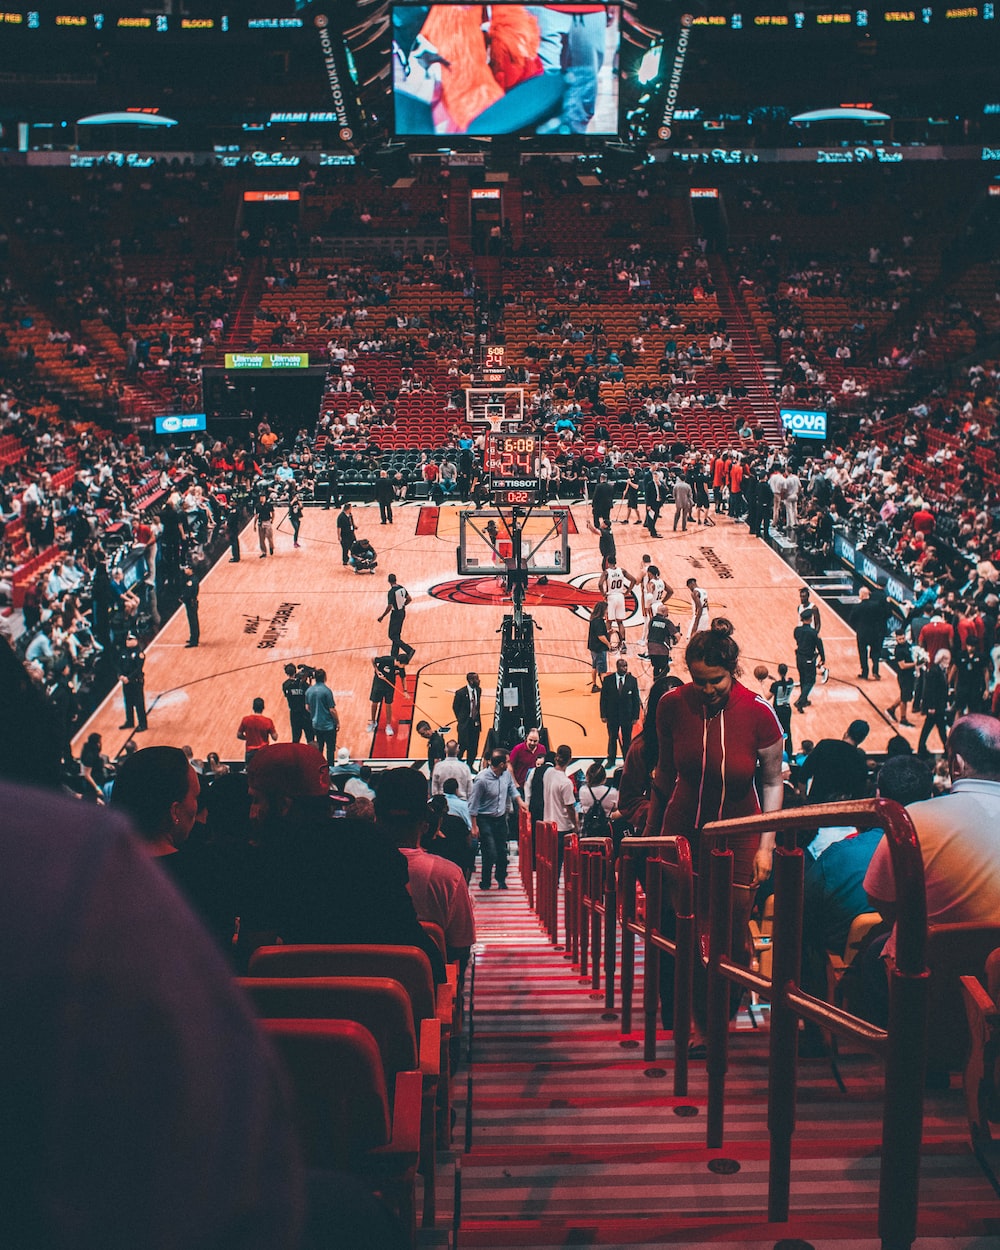 Basketball Stadium Picture. Download Free Image